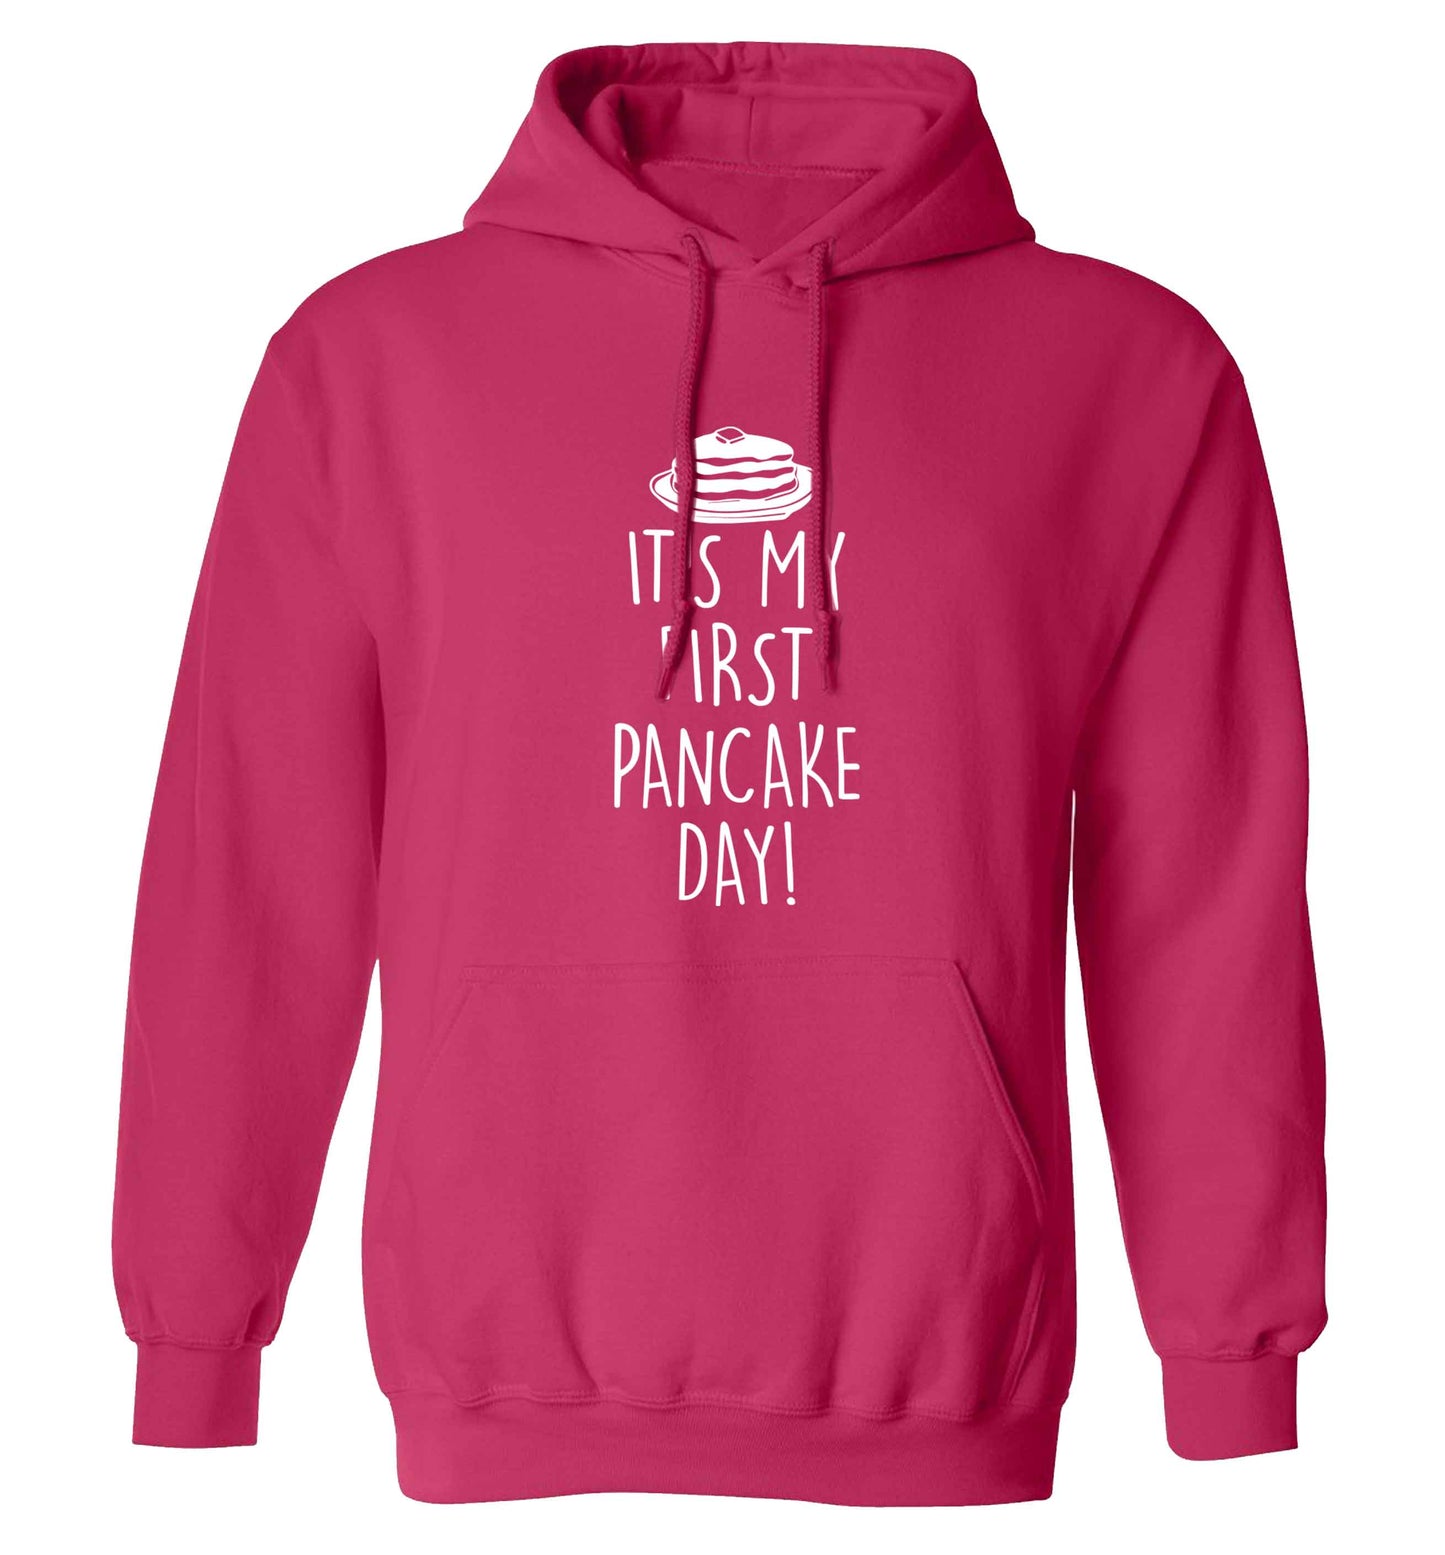 It's my first pancake day adults unisex pink hoodie 2XL